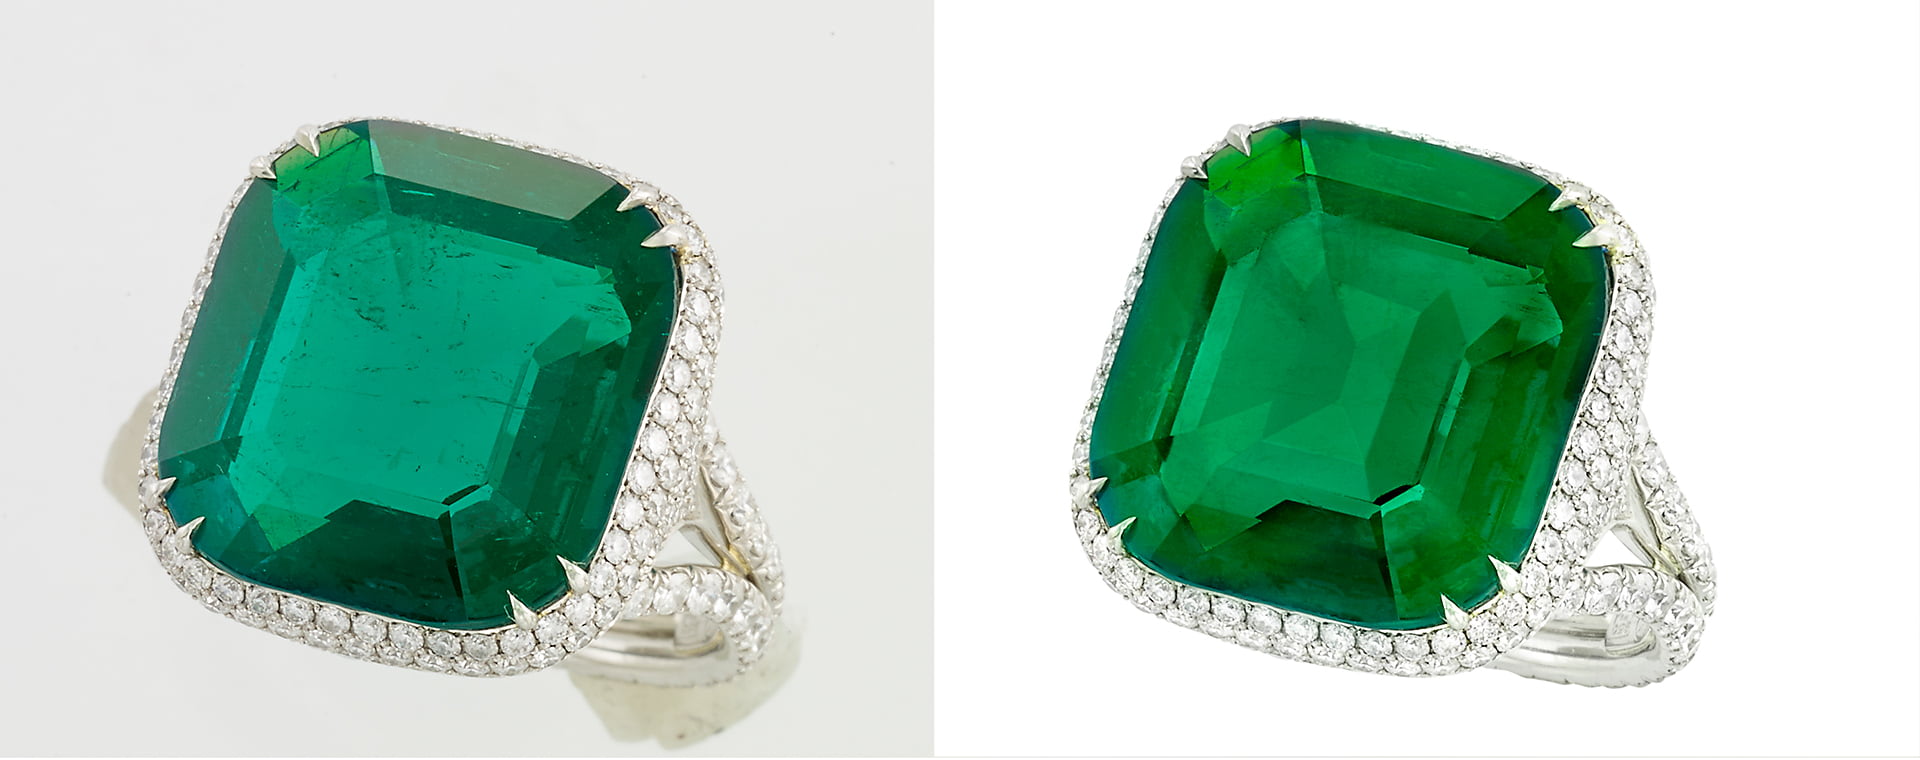 Jewelry Retouching Services Before and After Image 4